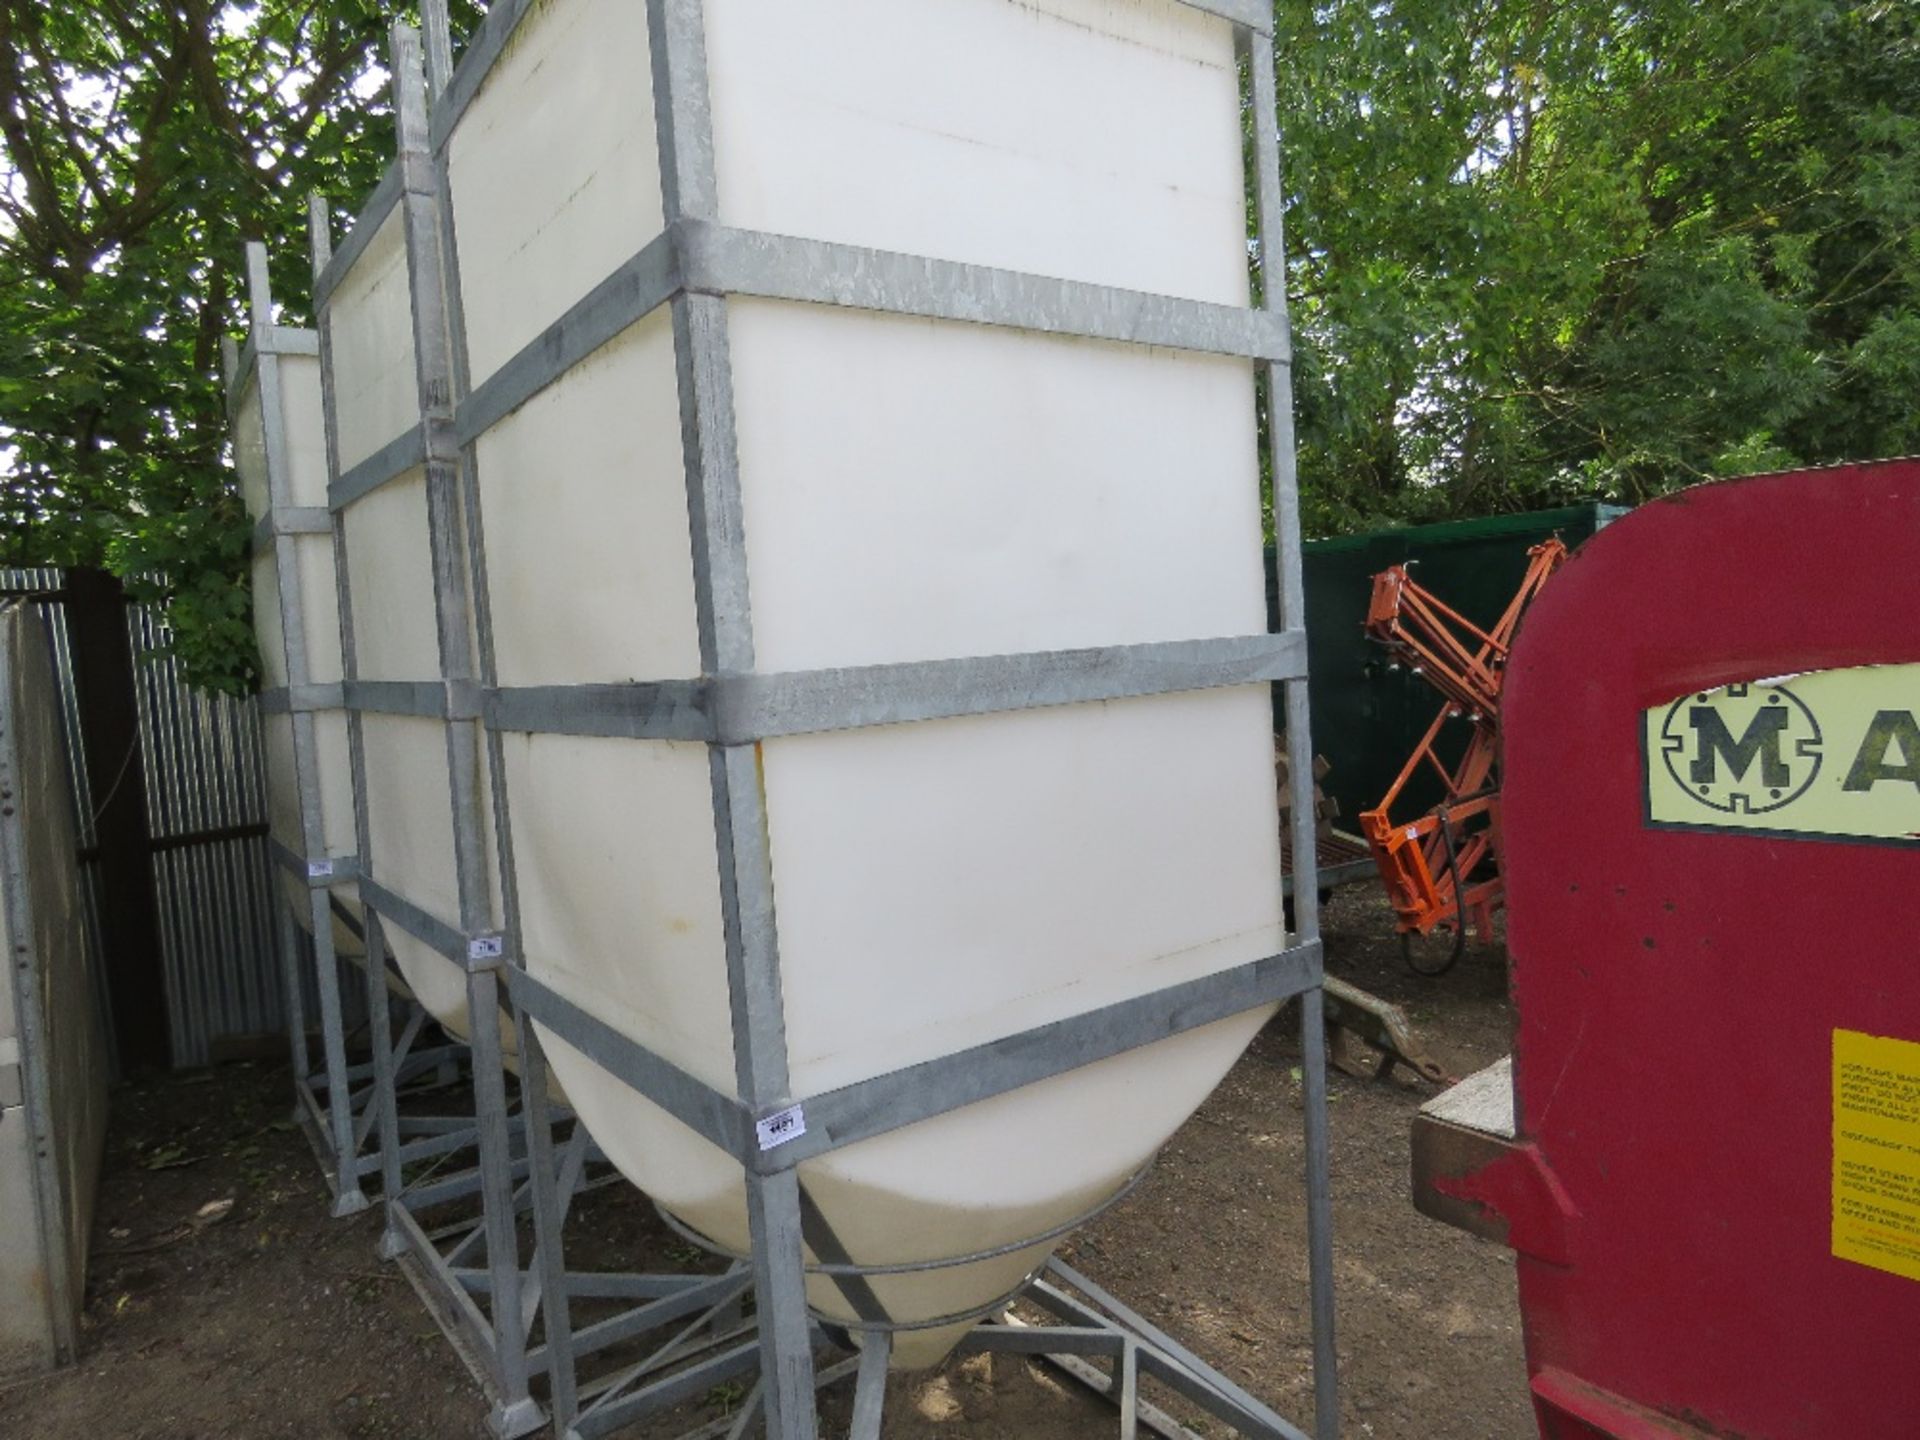 LARGE SIZED 2250 LITRE, YEAR 2013, WATER/LIQUID HOPPER IN FRAME. DIRECT EX SITE CLOSURE.